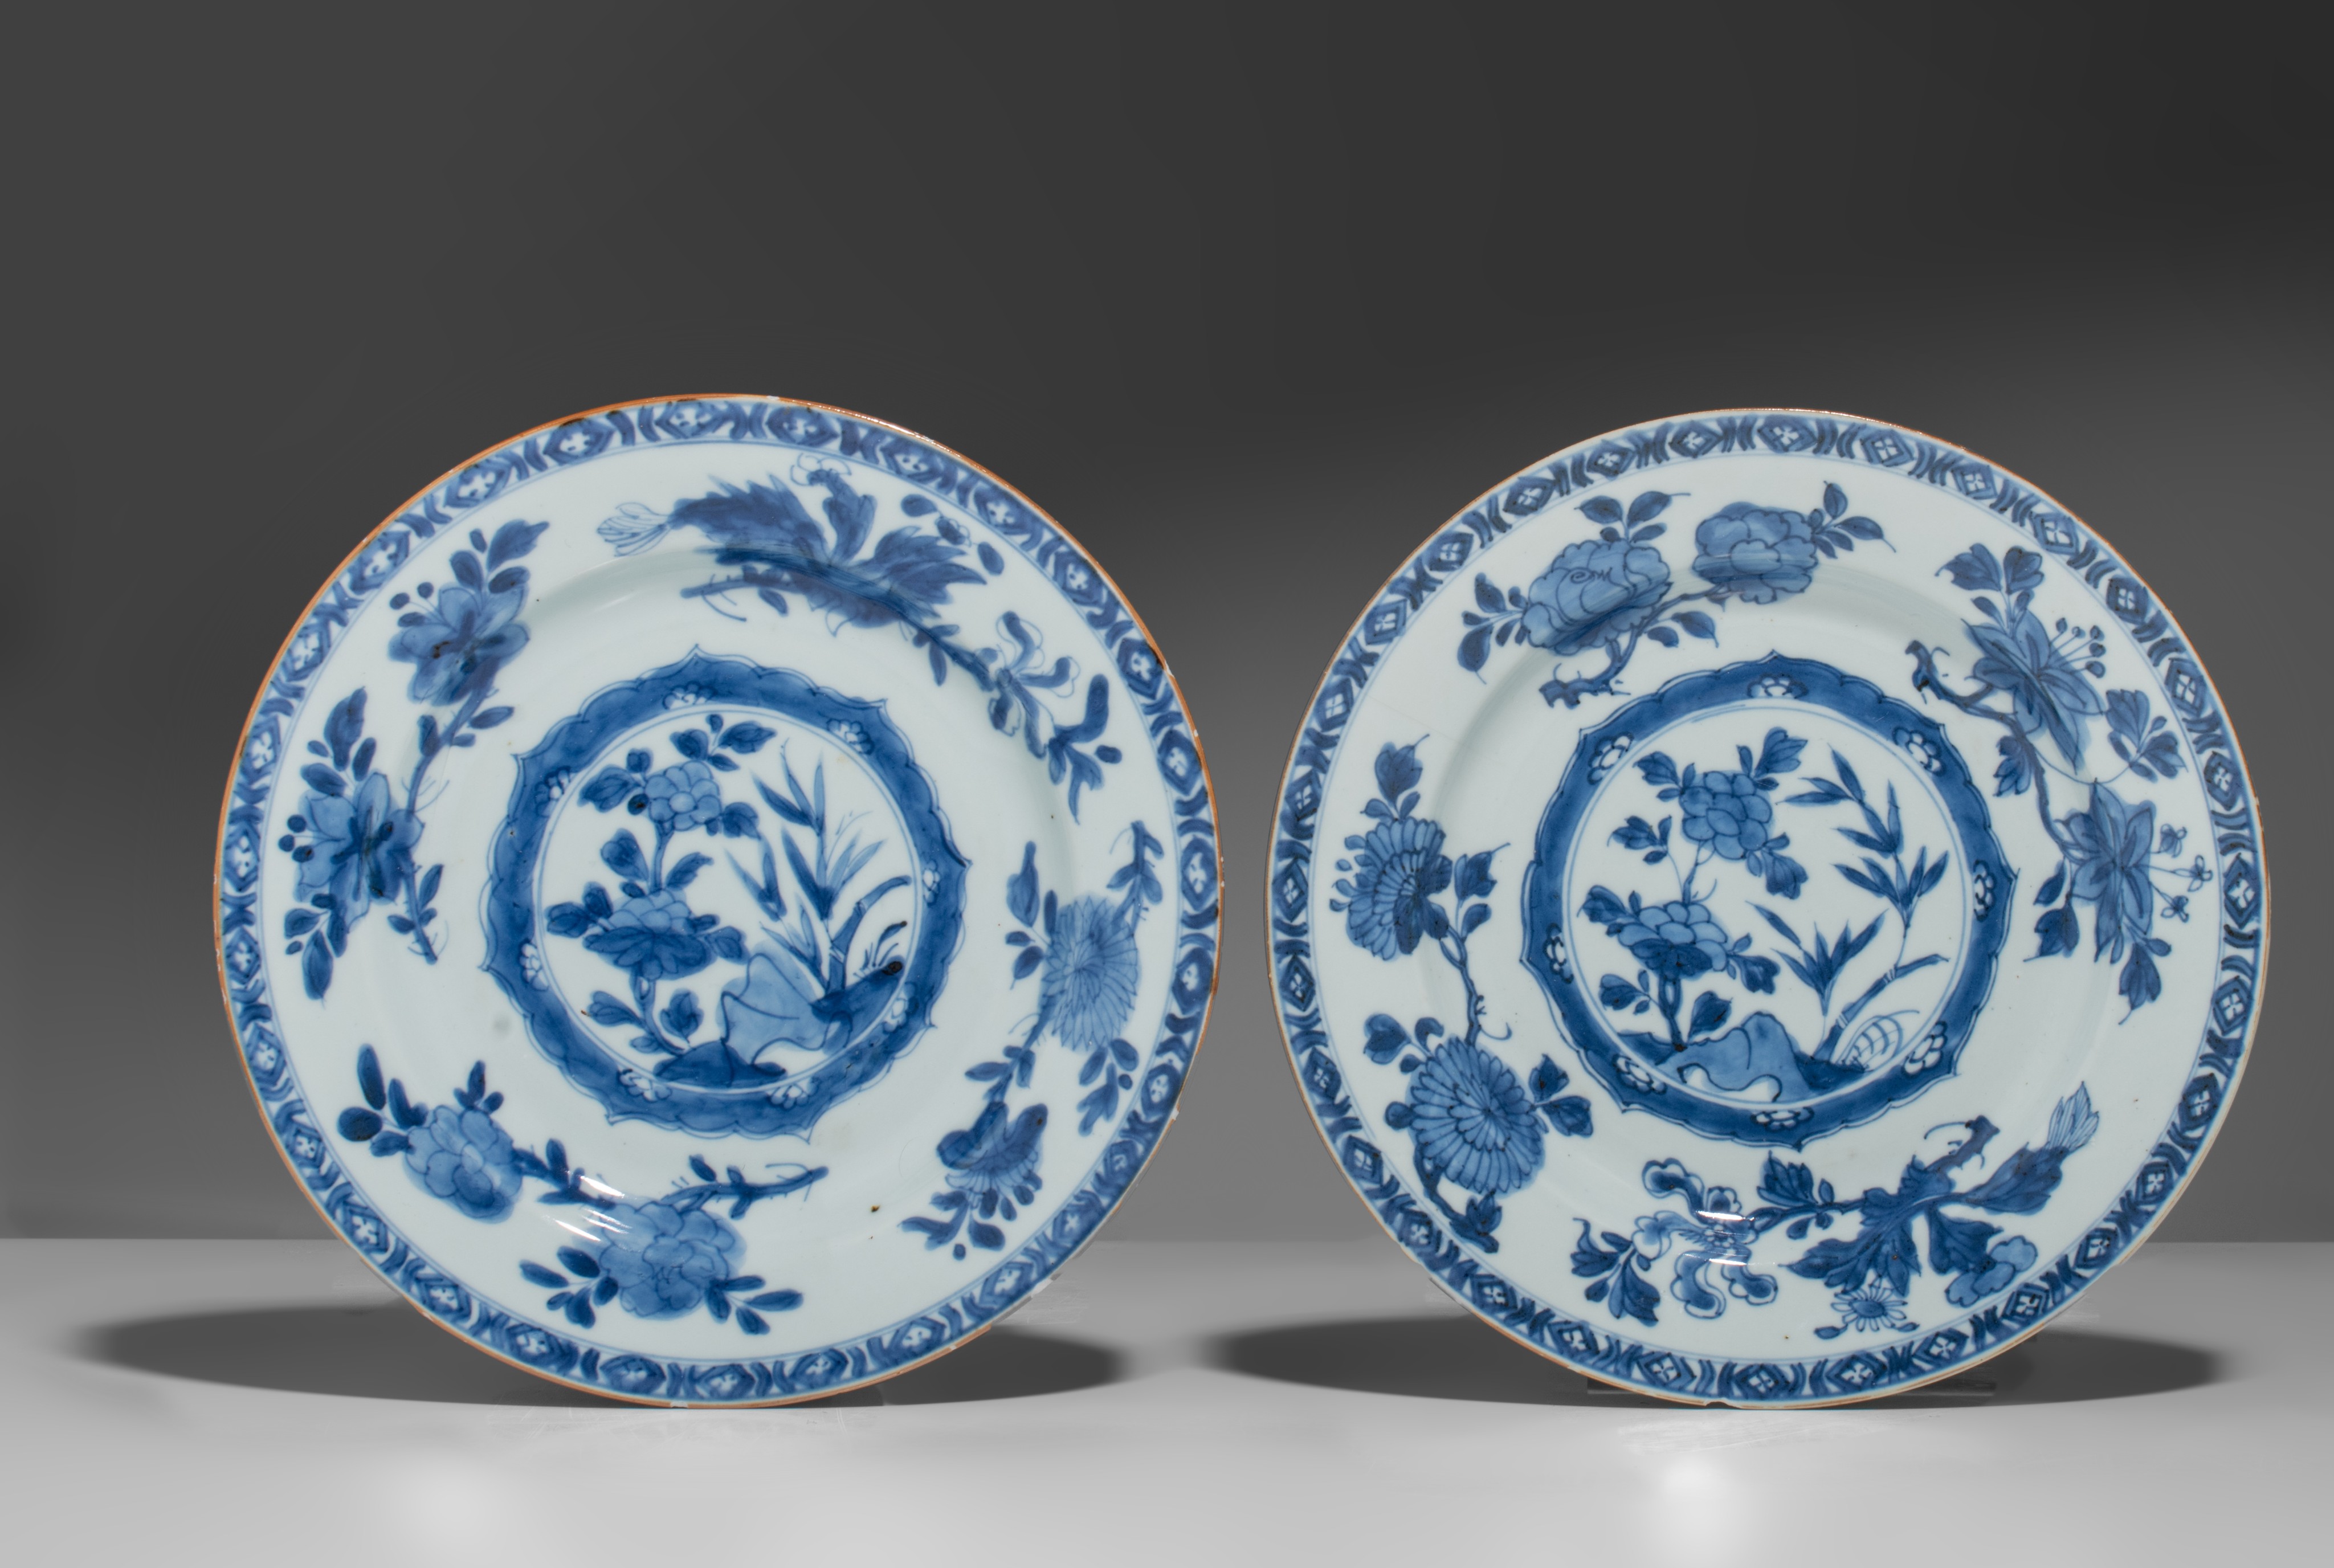 A collection of Chinese blue and white porcelain ware, Qianlong period, largest ø 38 cm